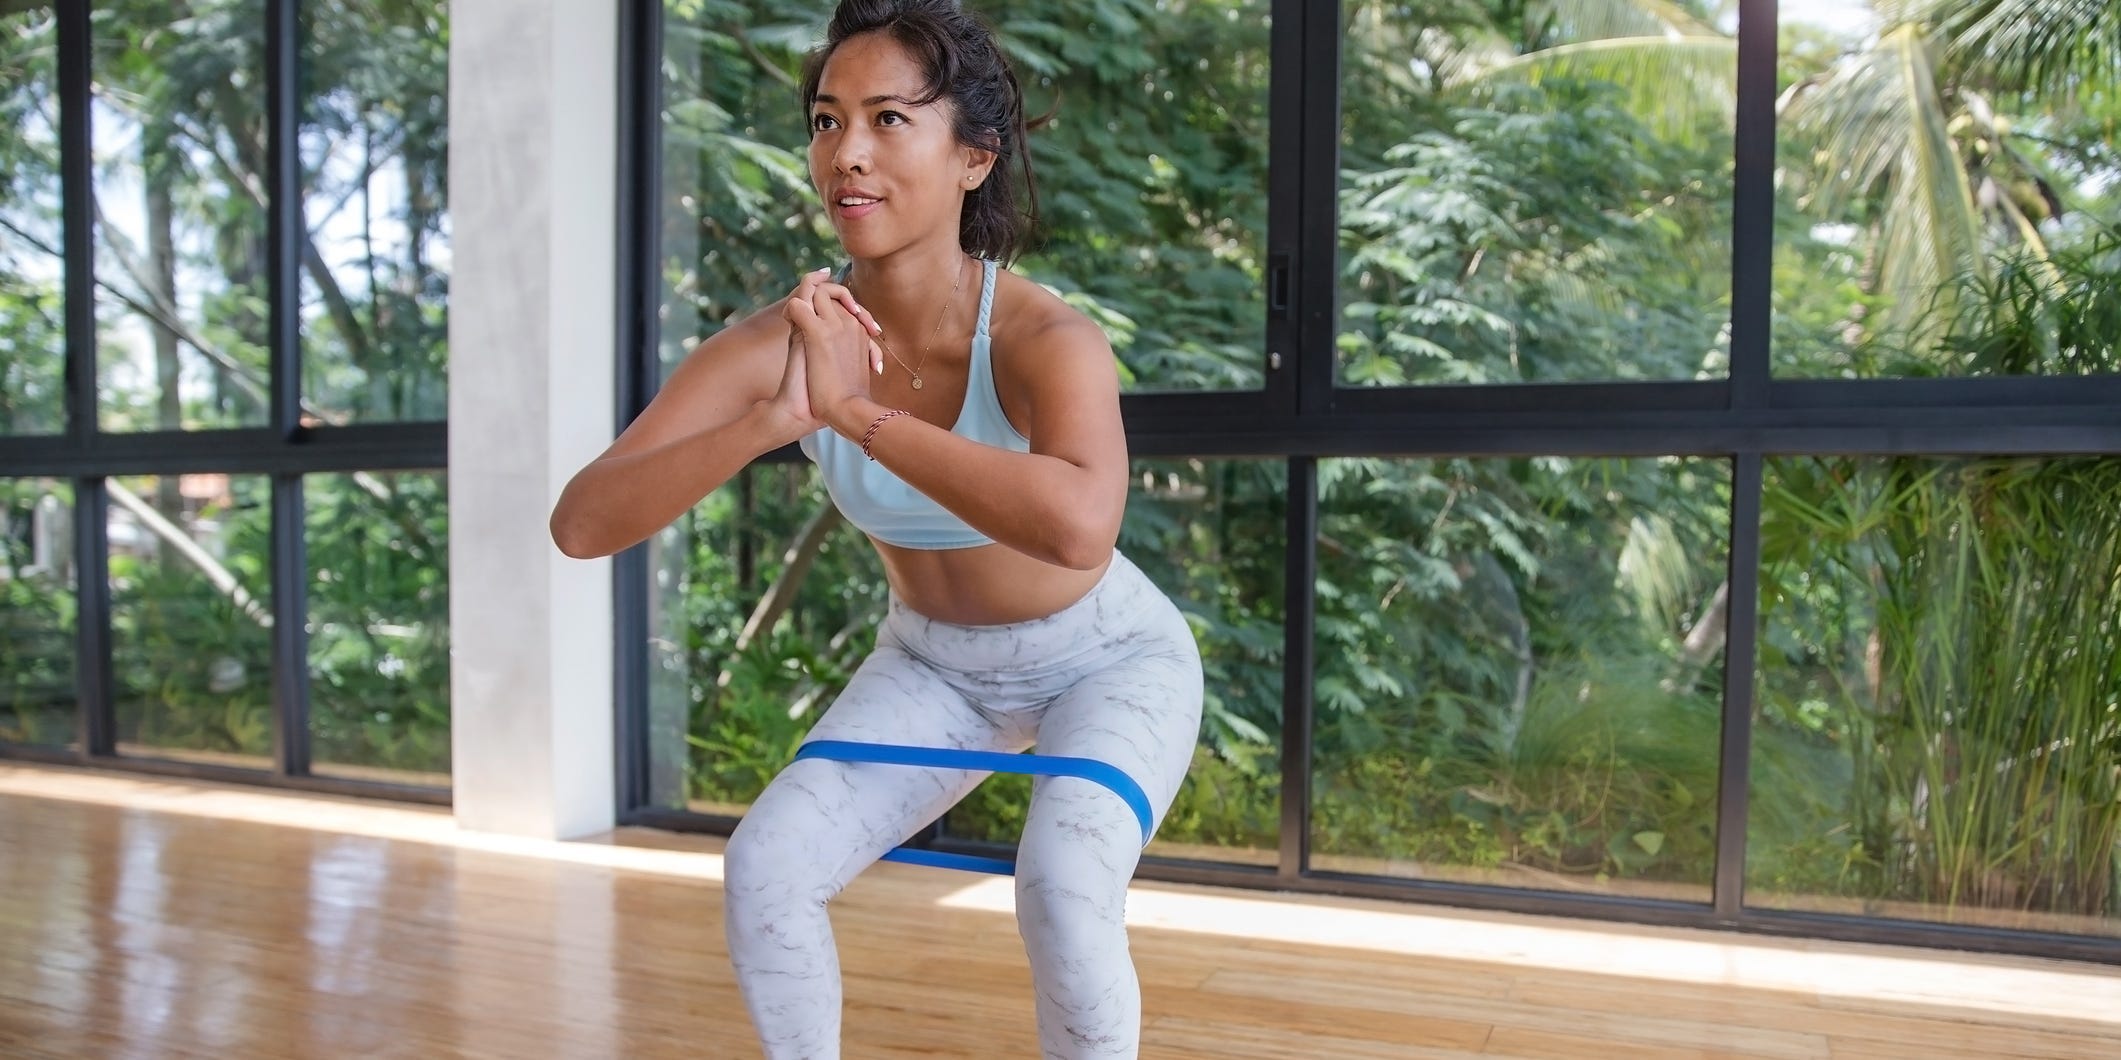 Squats are a great exercises to tone and strengthen your hamstring muscles.